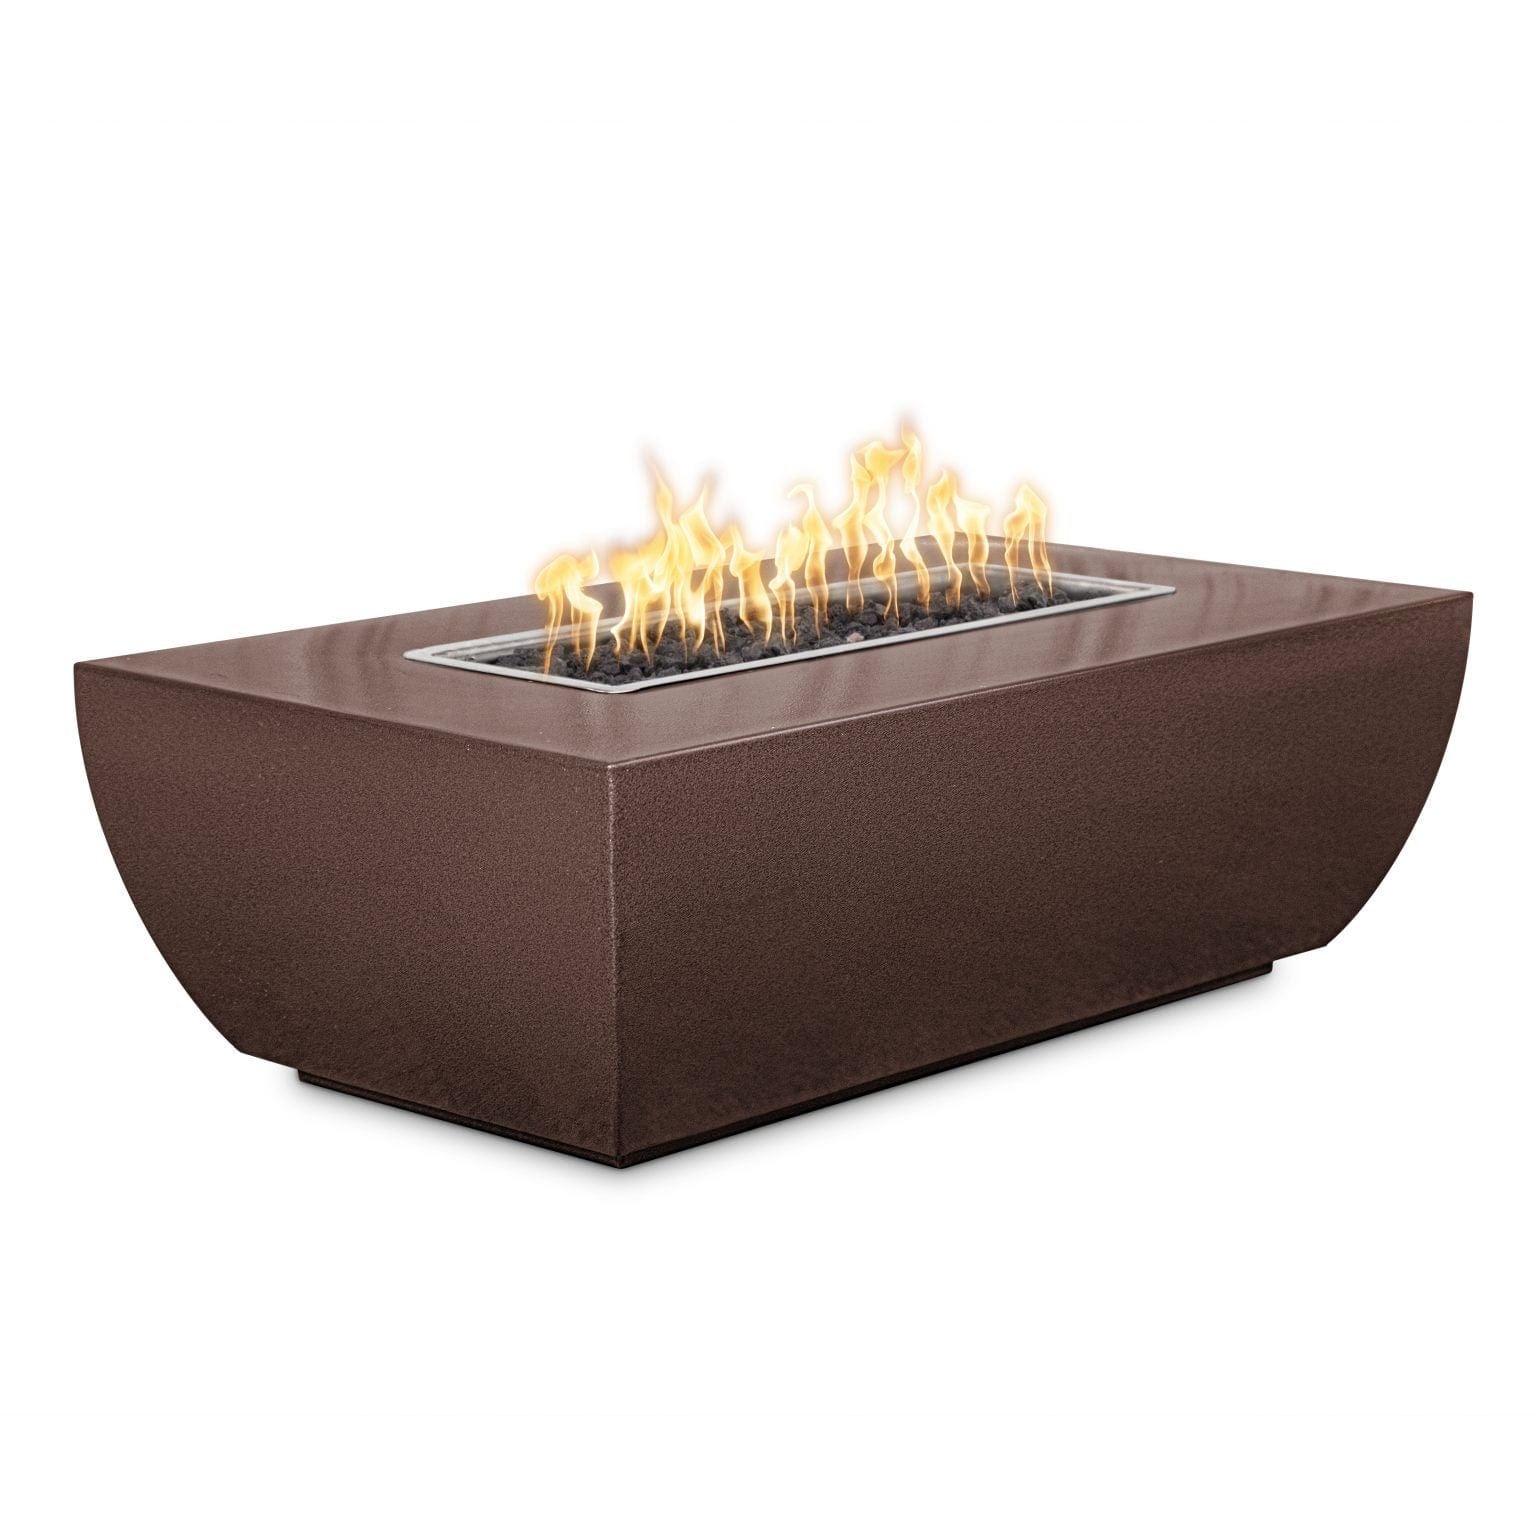 The Outdoor Plus Fire Pit 48" x 28" / Match Lit The Outdoor Plus Avalon 15" Tall Linear Fire Pit | Copper OPT-AVLCPR4815